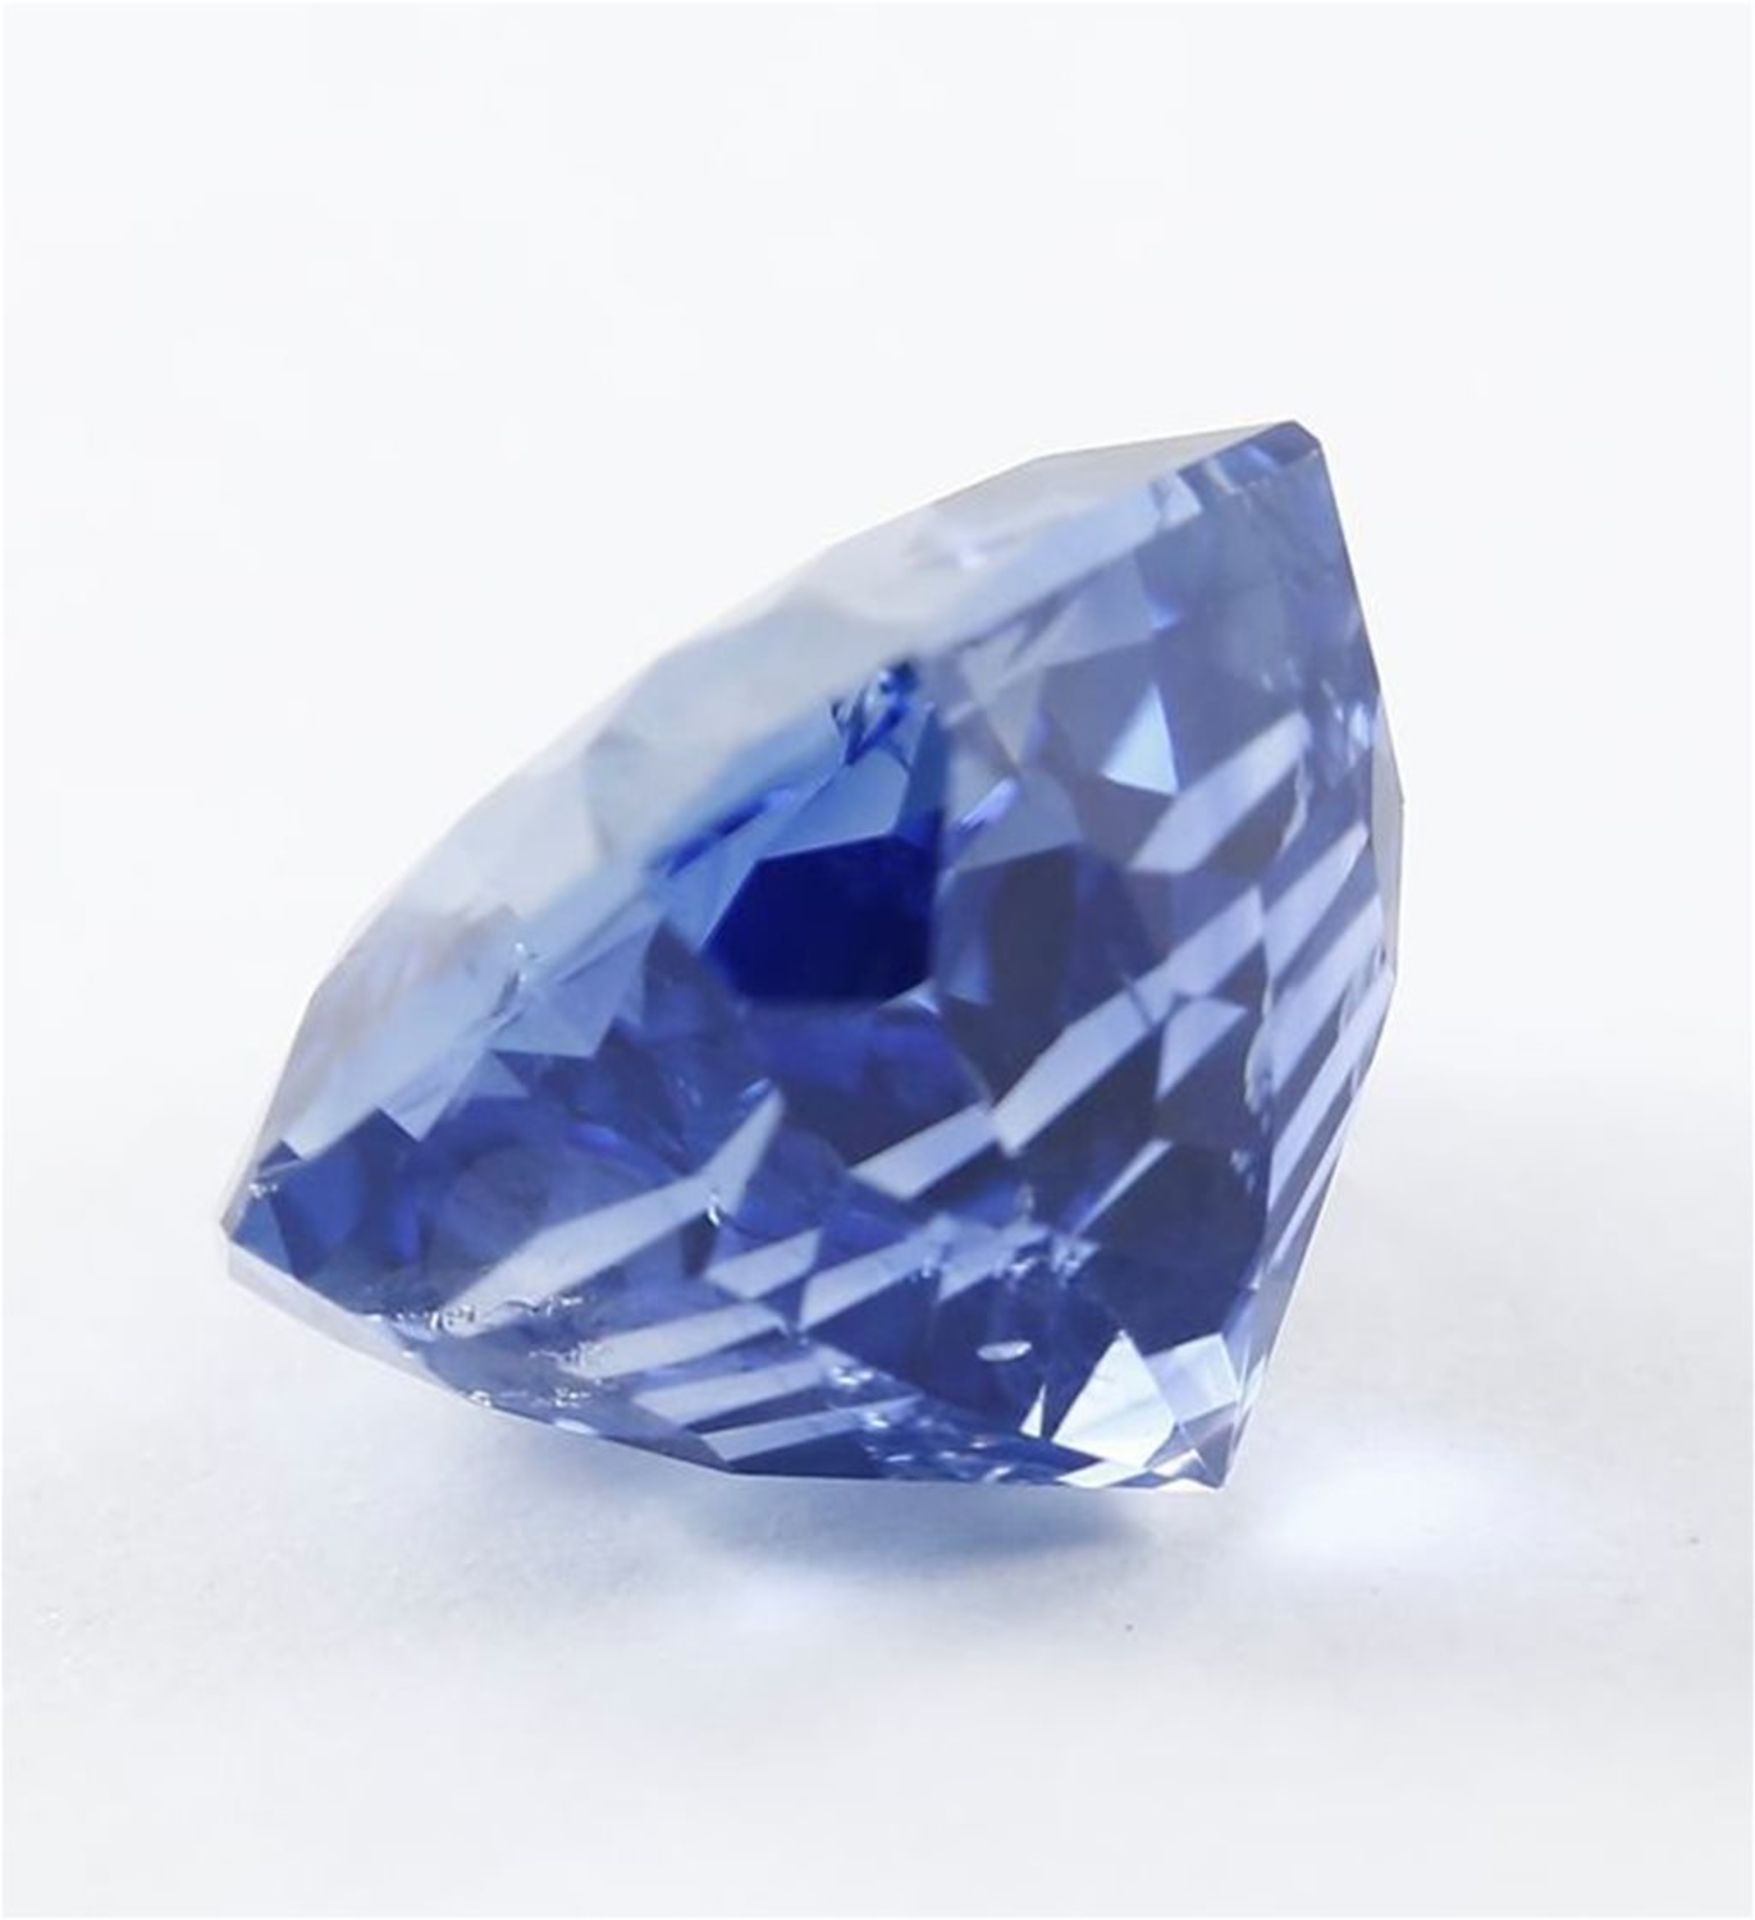 GIA Certified 3.51 ct. Untreated Blue Sapphire - BURMA - Image 6 of 7